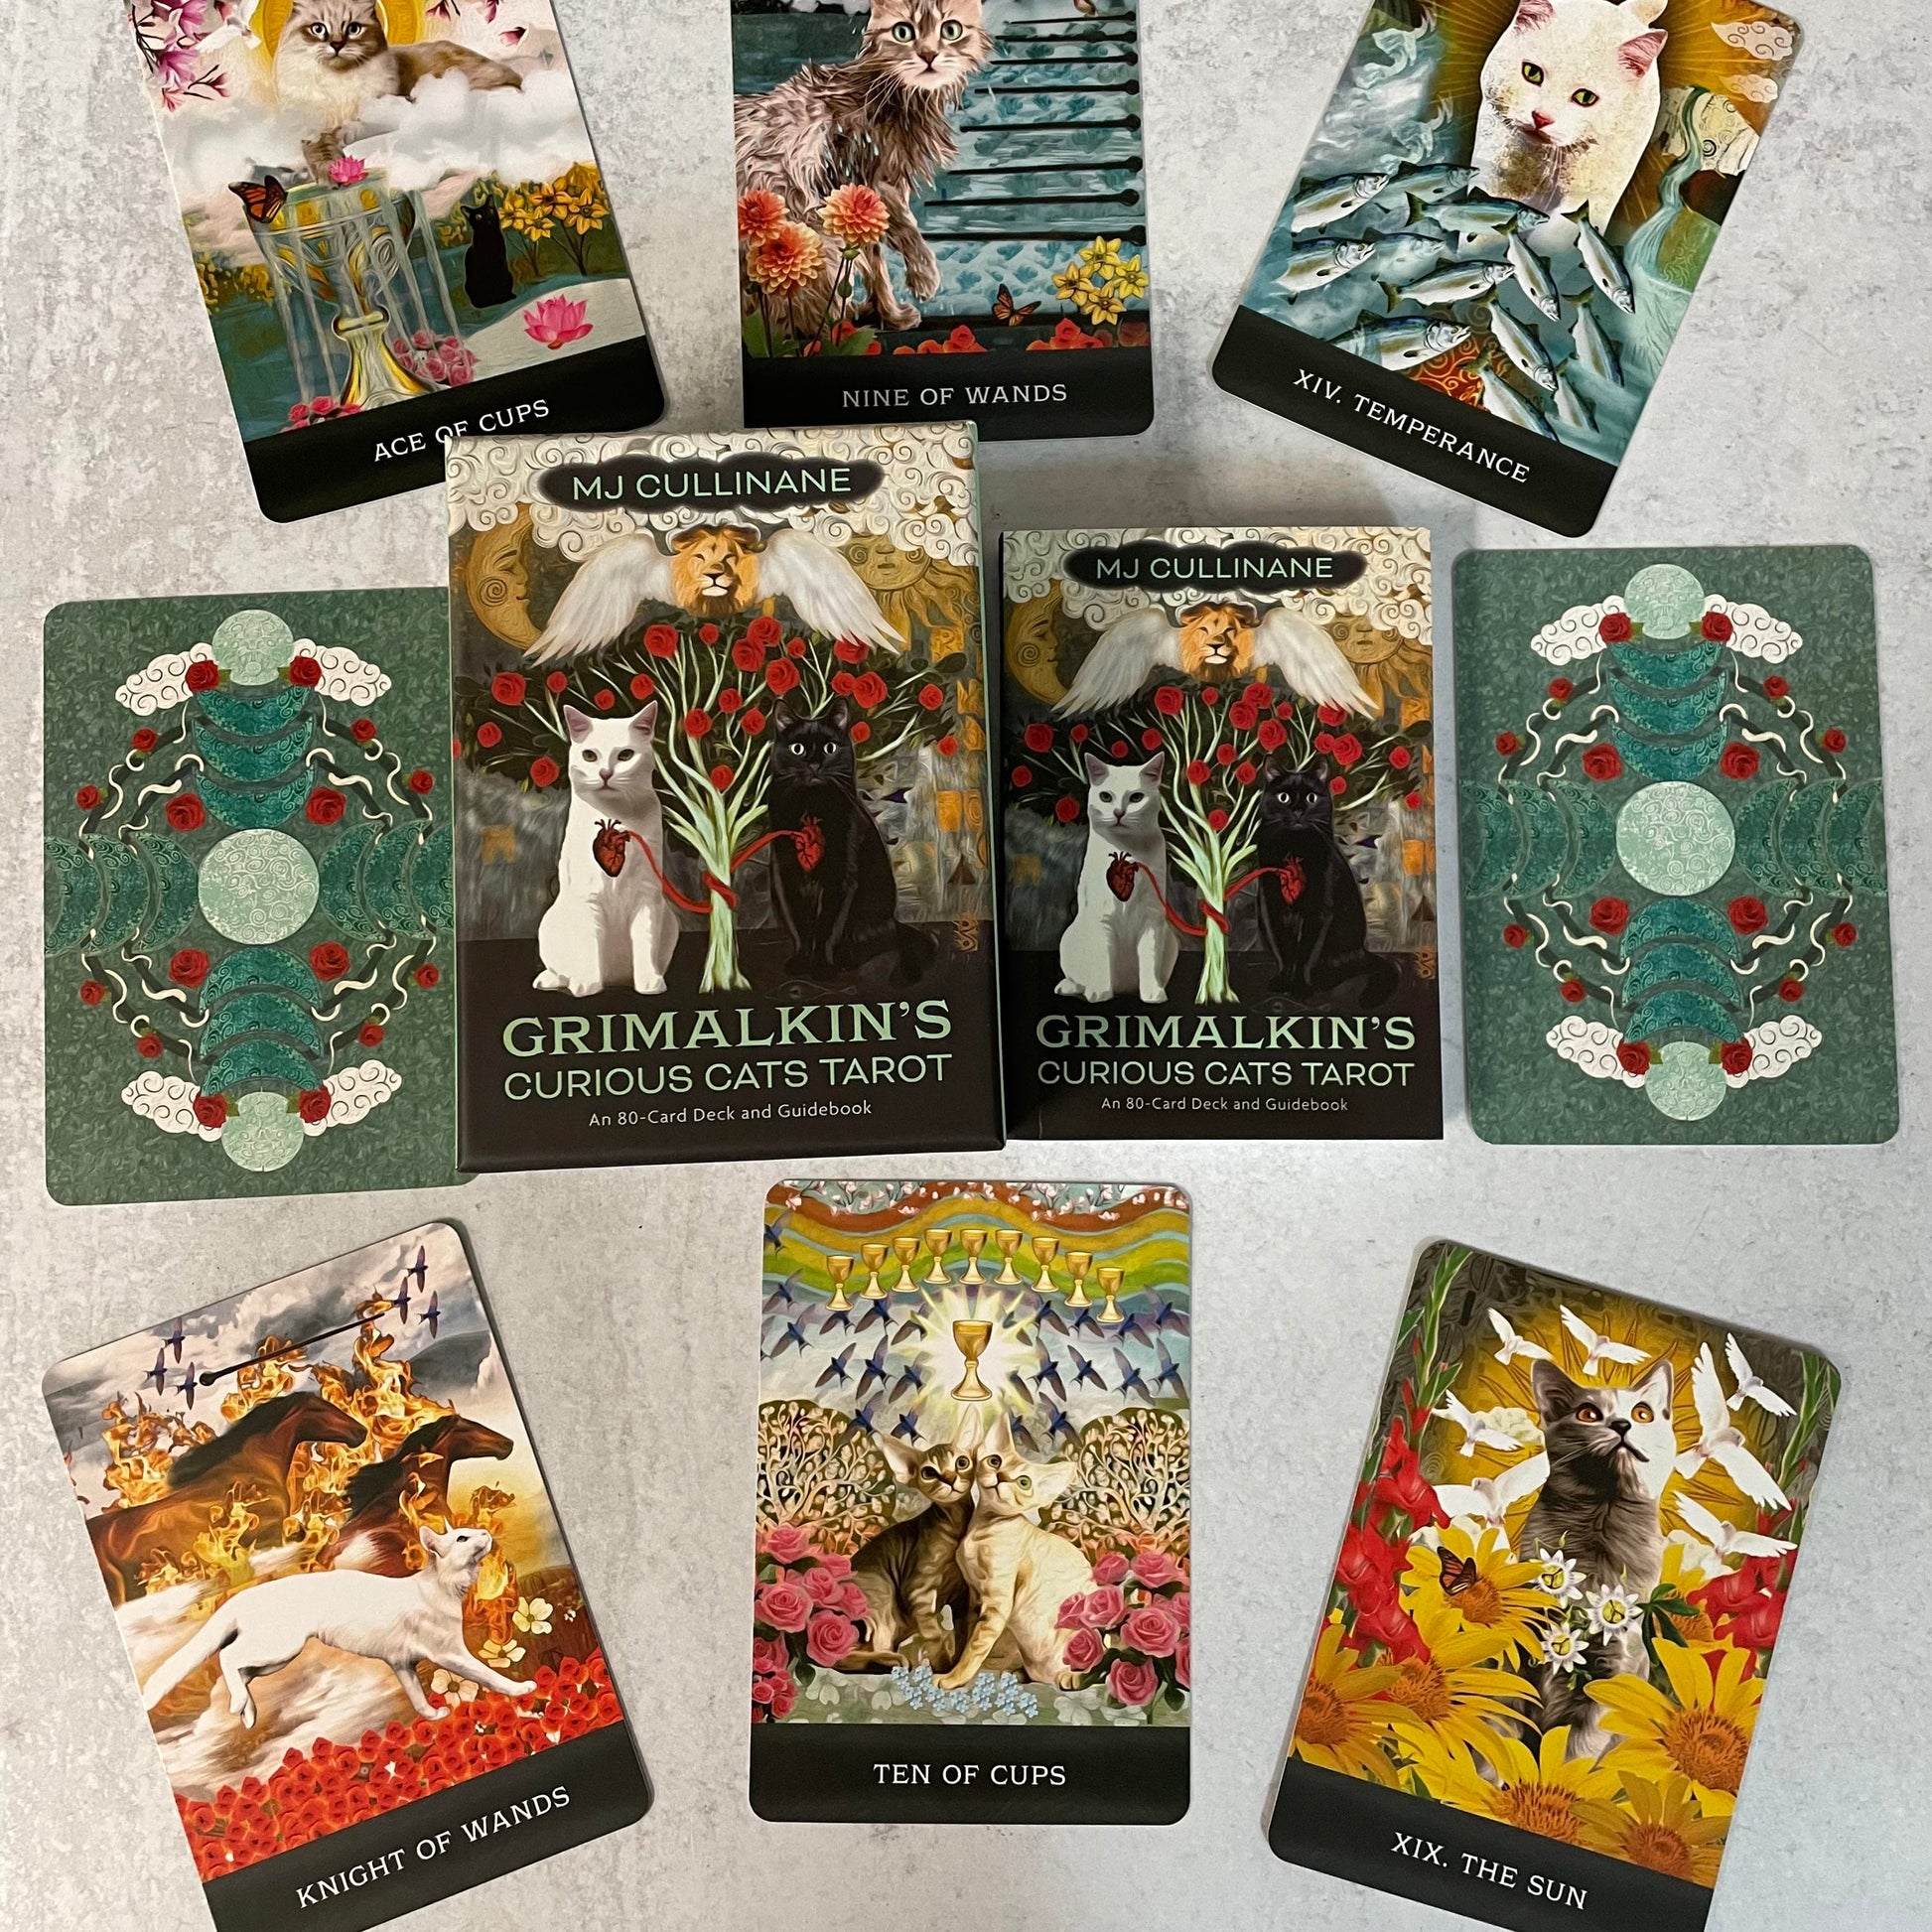 Grimalkin cards and book